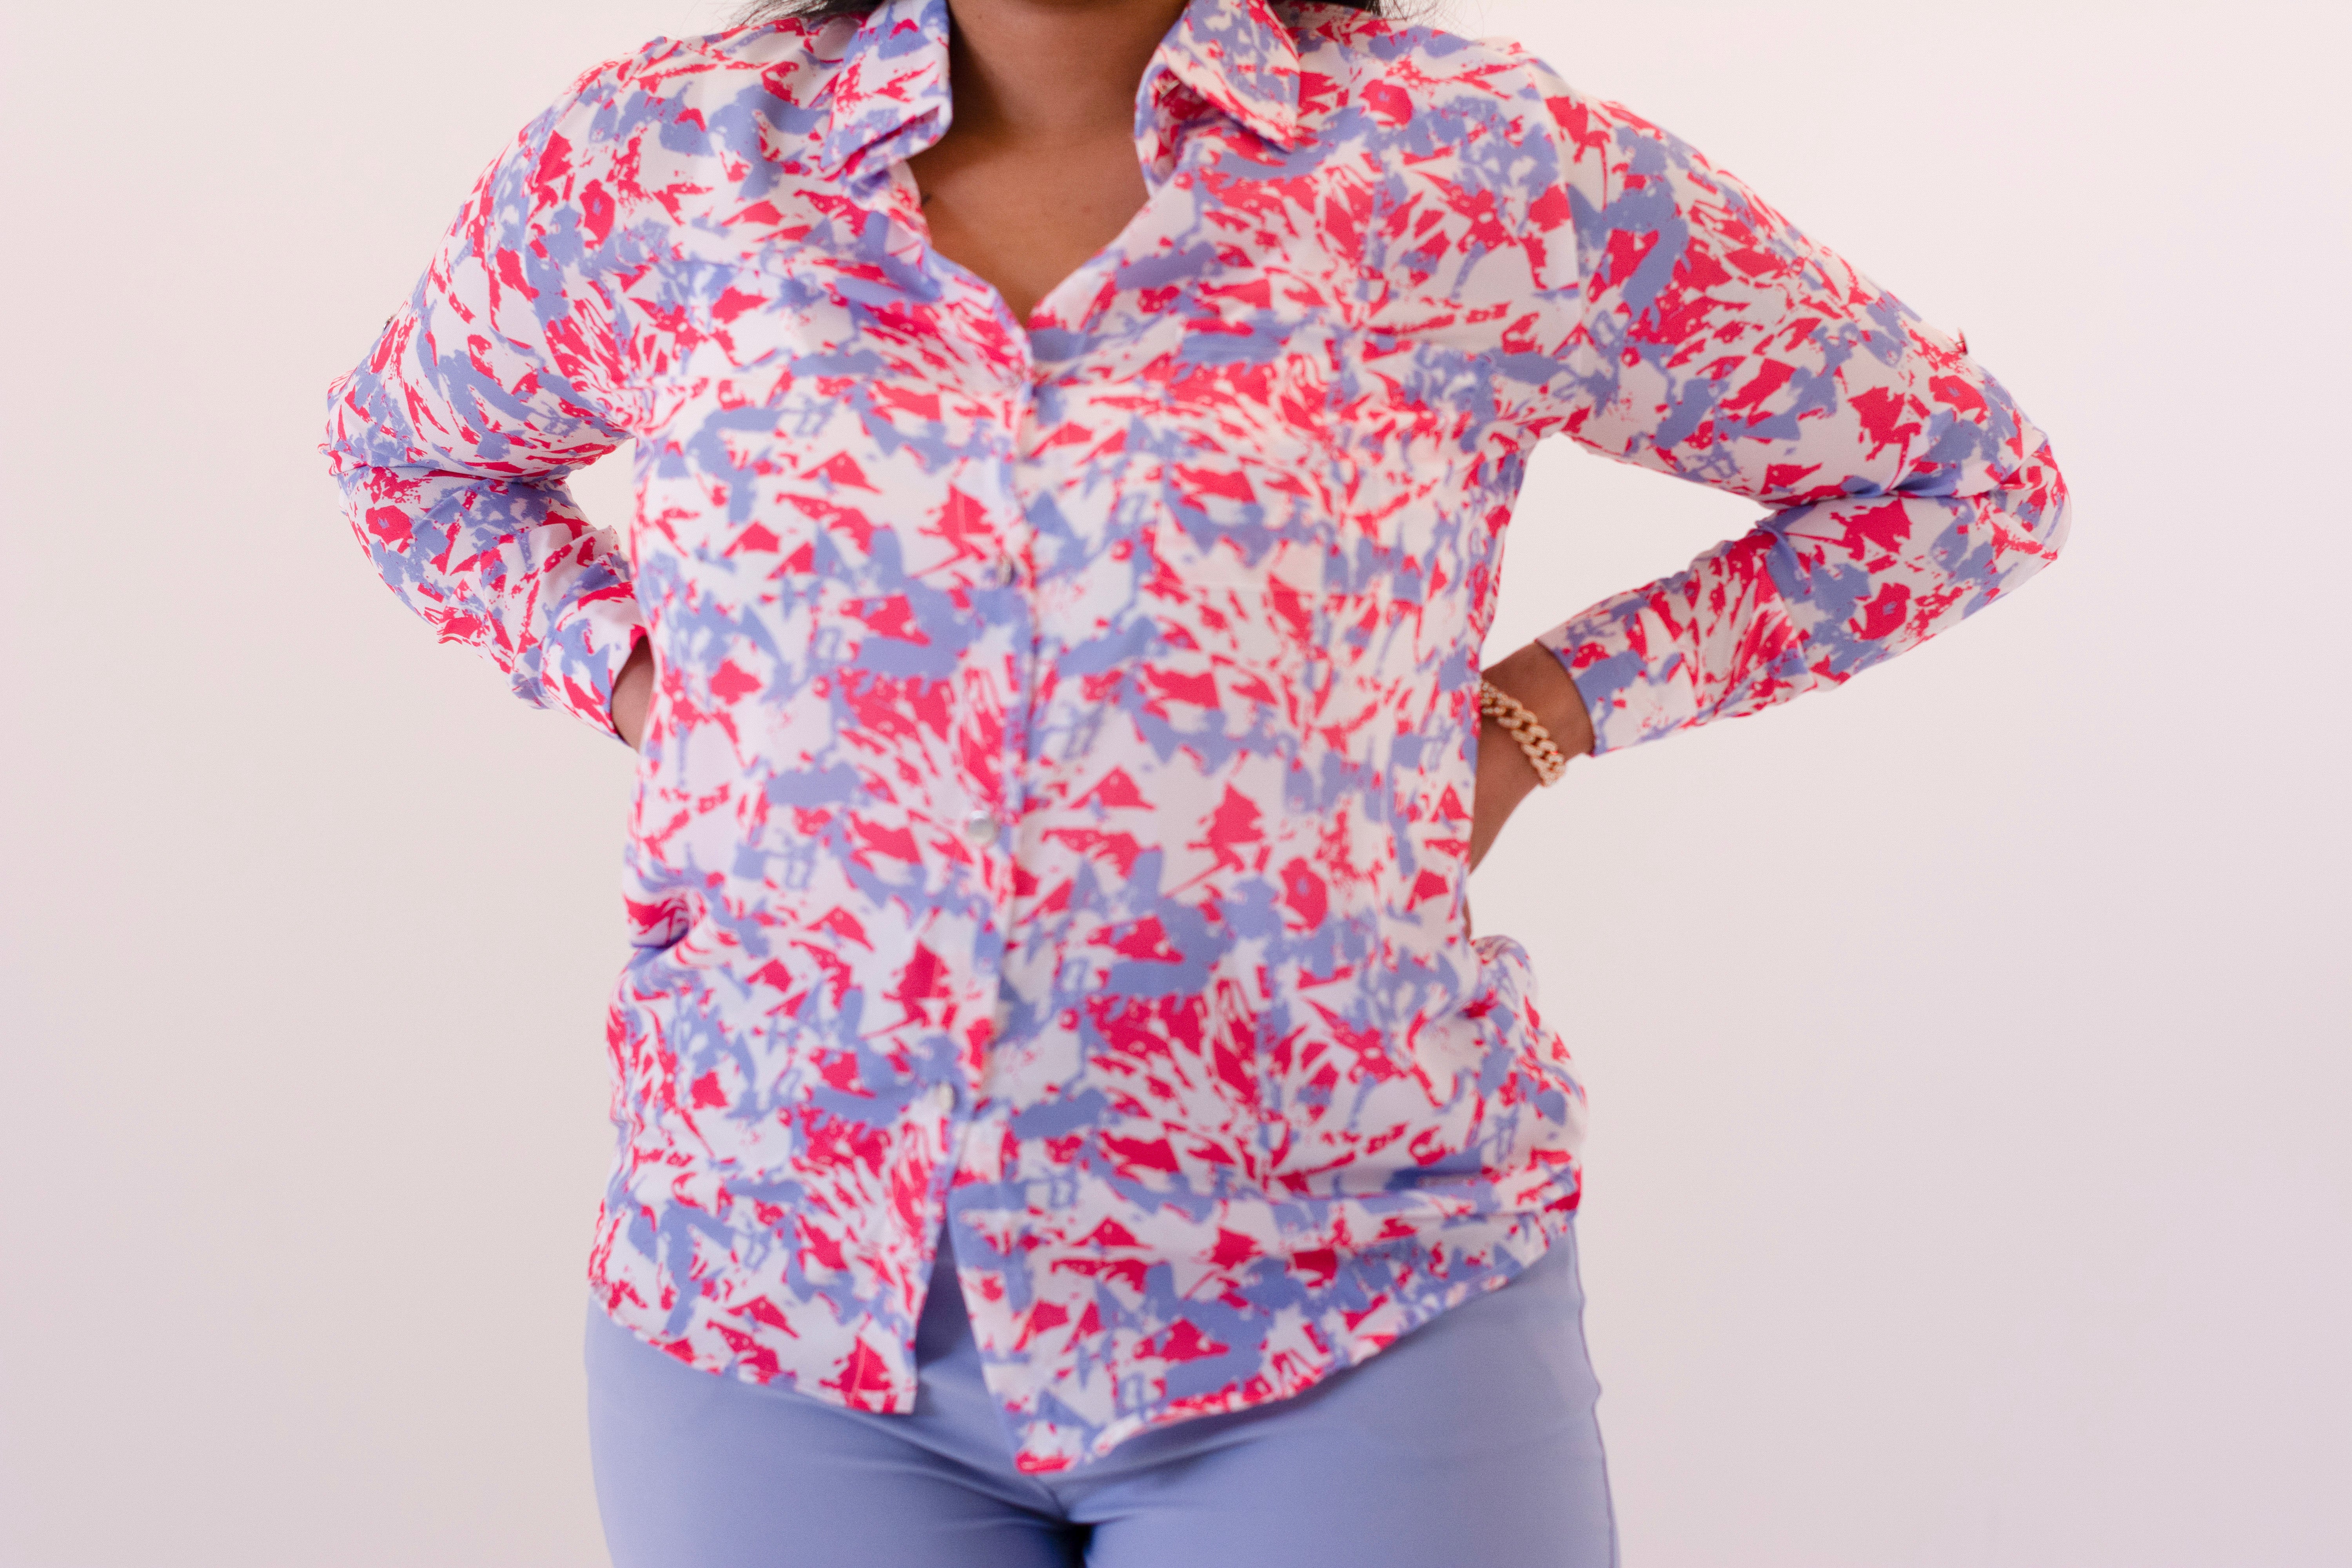 Women's pink and blue button up blouse with long sleeves